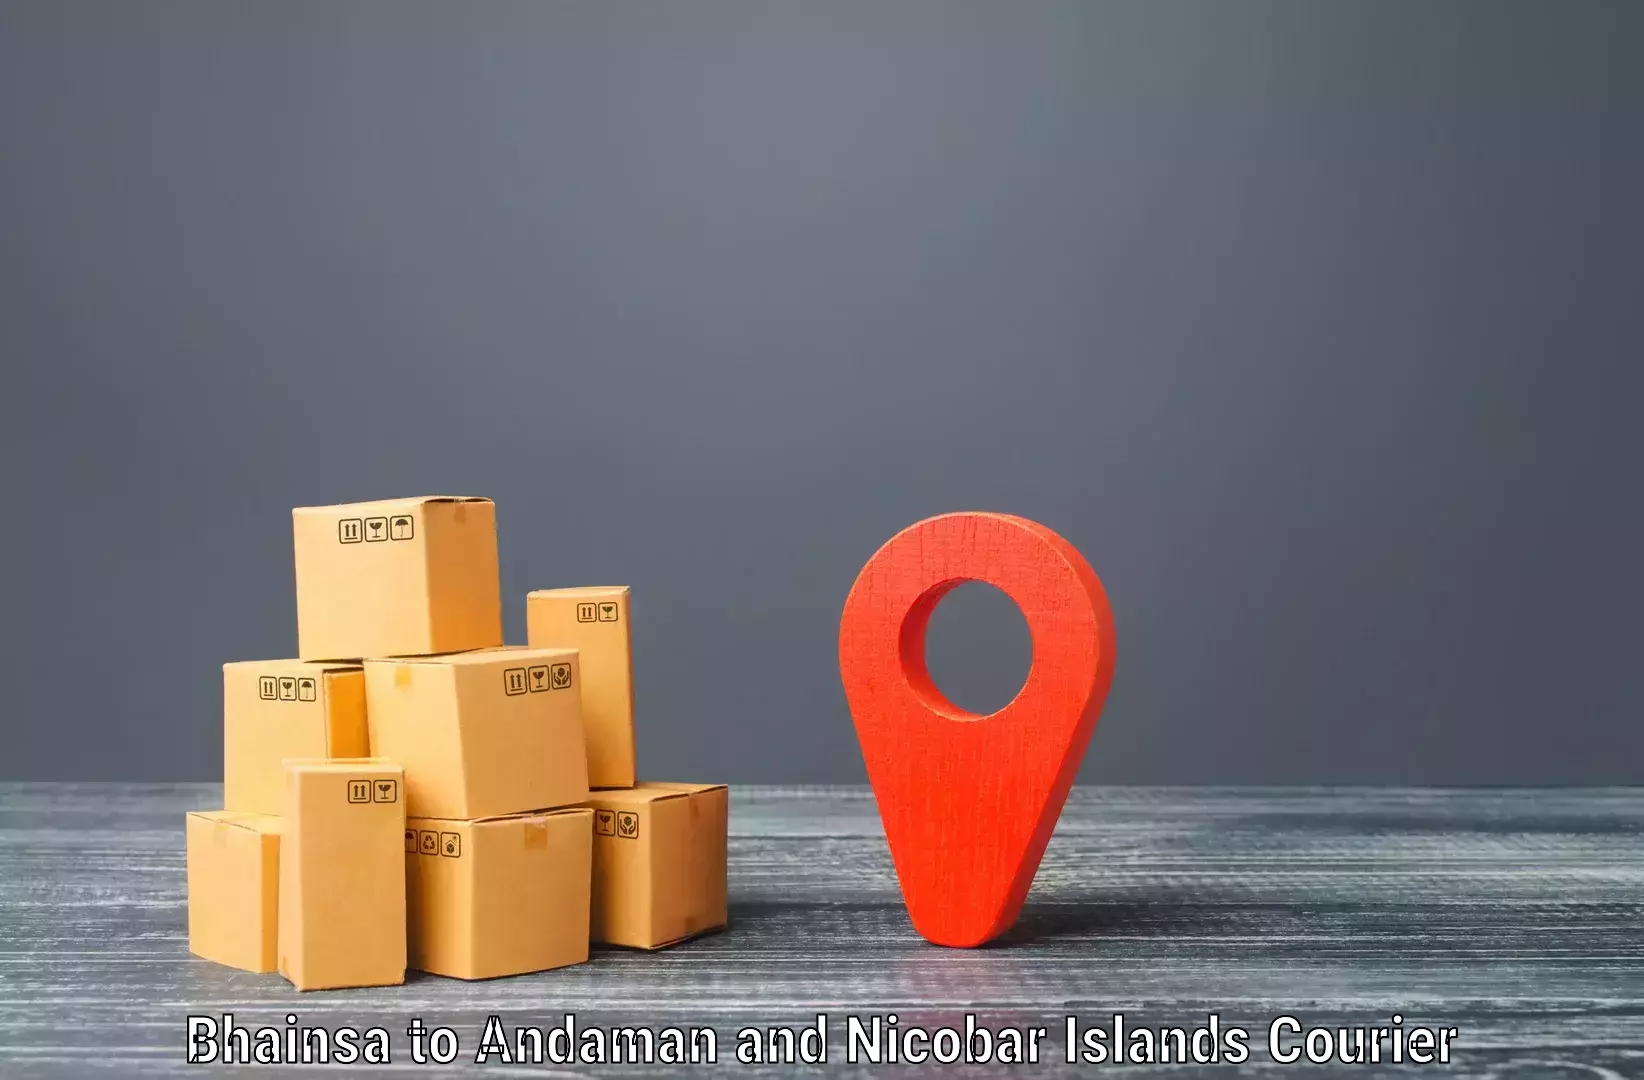 Overnight delivery services Bhainsa to Andaman and Nicobar Islands